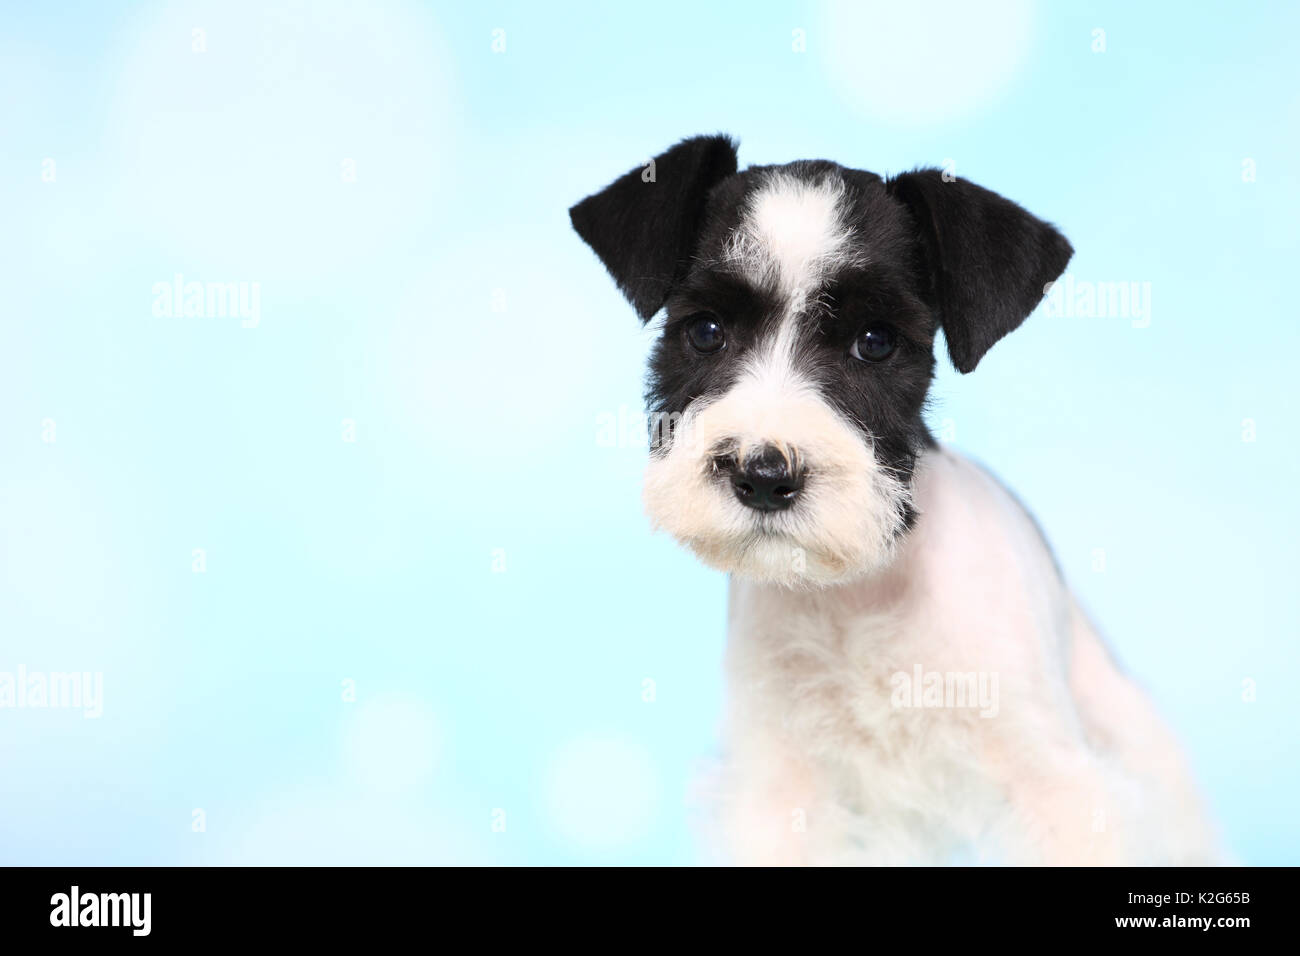 Parti-colored Miniature Schnauzer. Portrait of a puppy, seen against a light blue background. Germany Stock Photo